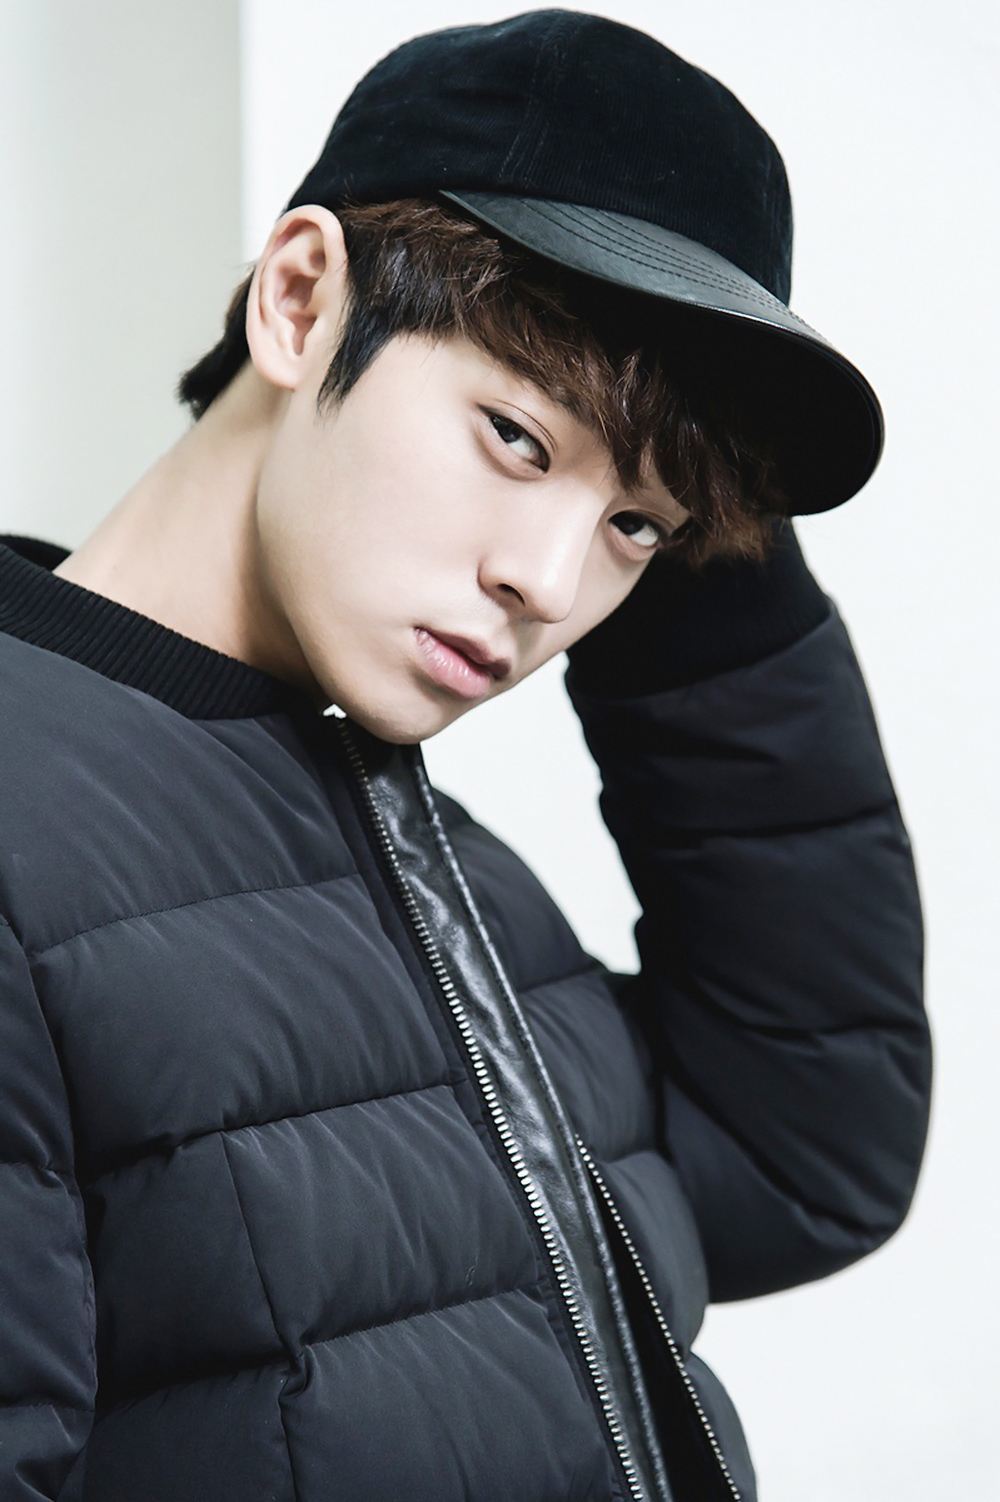 Jung Joon Young for Siero